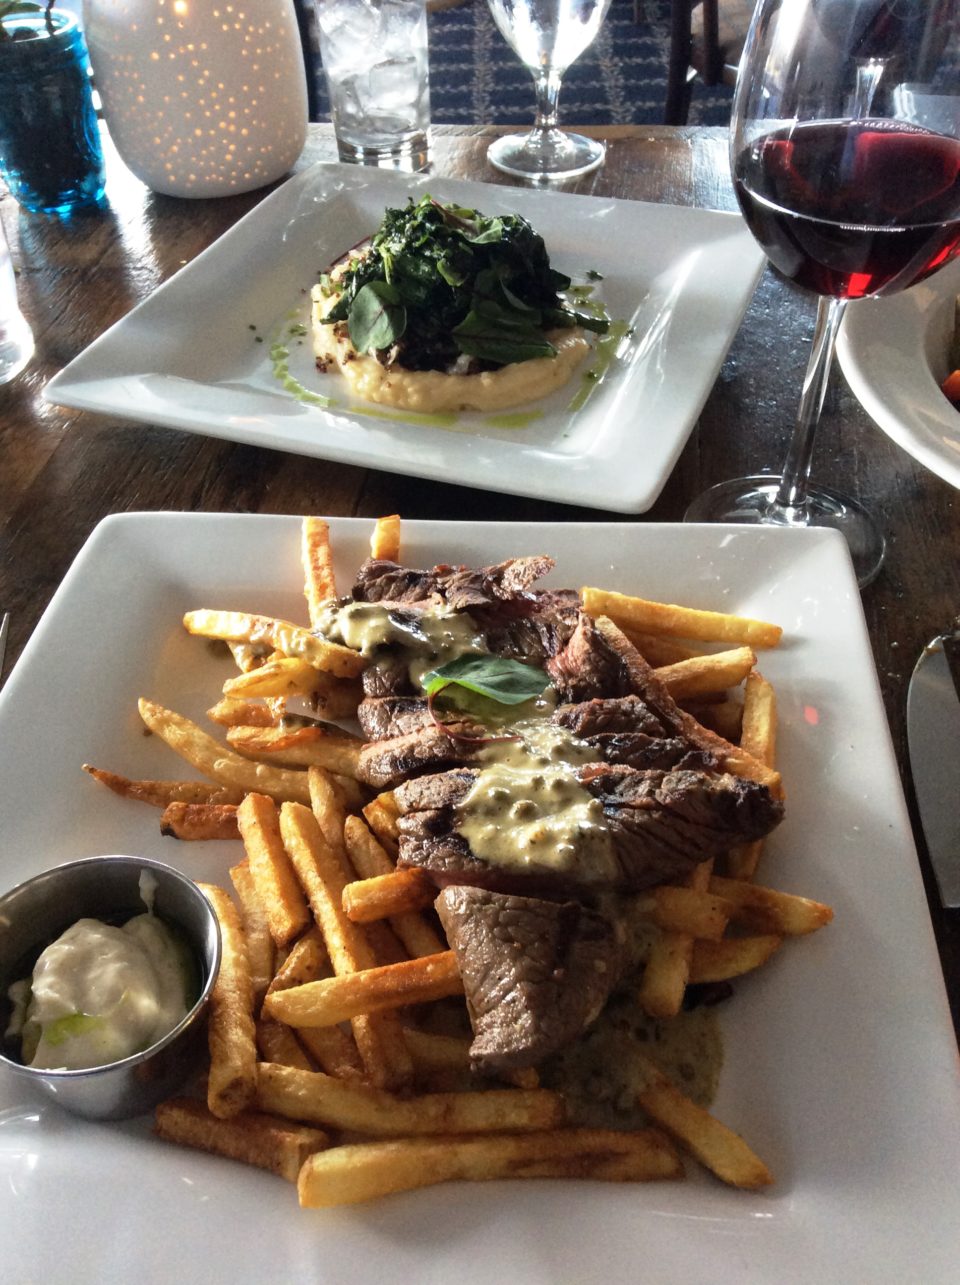 Emerson Inn by the Sea : perfectly cooked Steak Frites with accompanying vegetable medley at Pigeon Cove Tavern restaurant